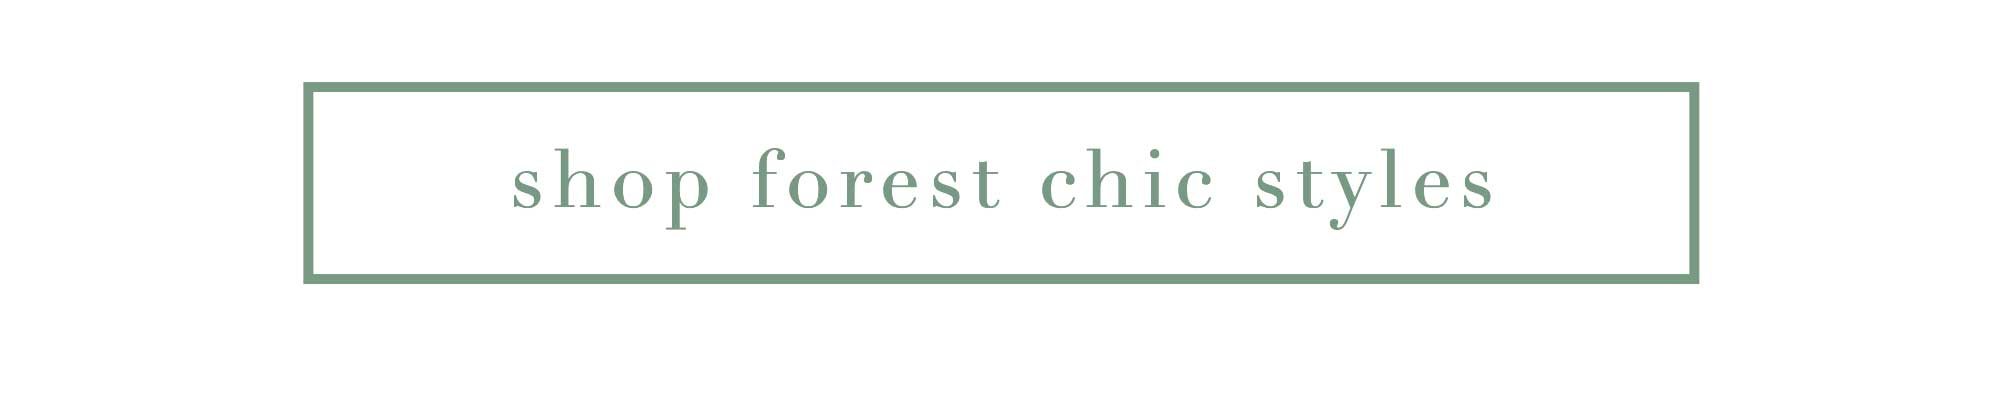 shop forest chic styles